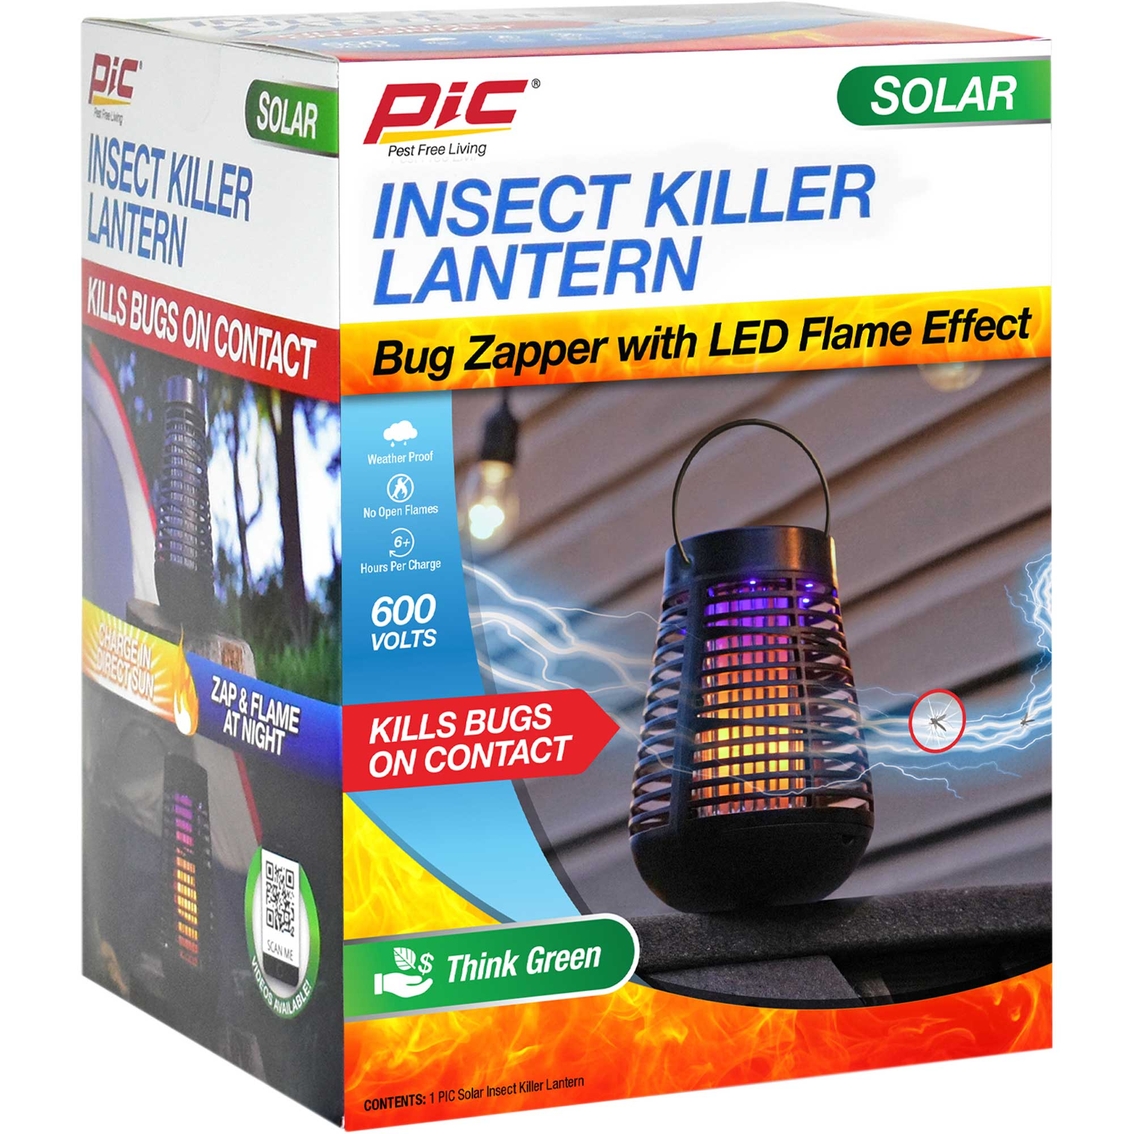 Pic Solar Portable Insect Killer Torch Pest Control Household